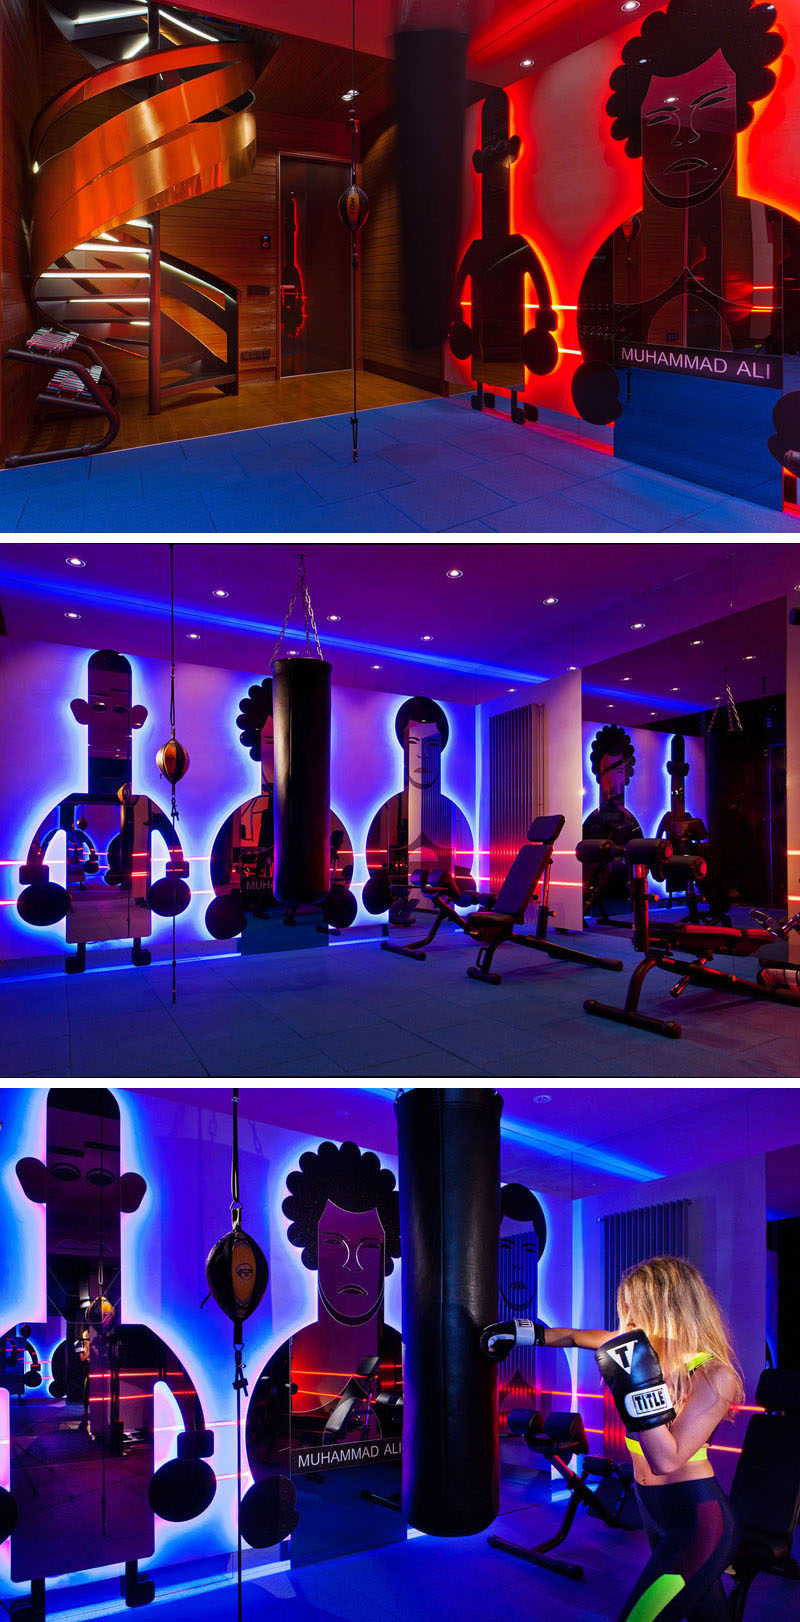 In this modern boxing gym there are custom-designed backlit mirrors are shaped like figures of famous boxers, while colorful lighting helps to keep the space vibrant.